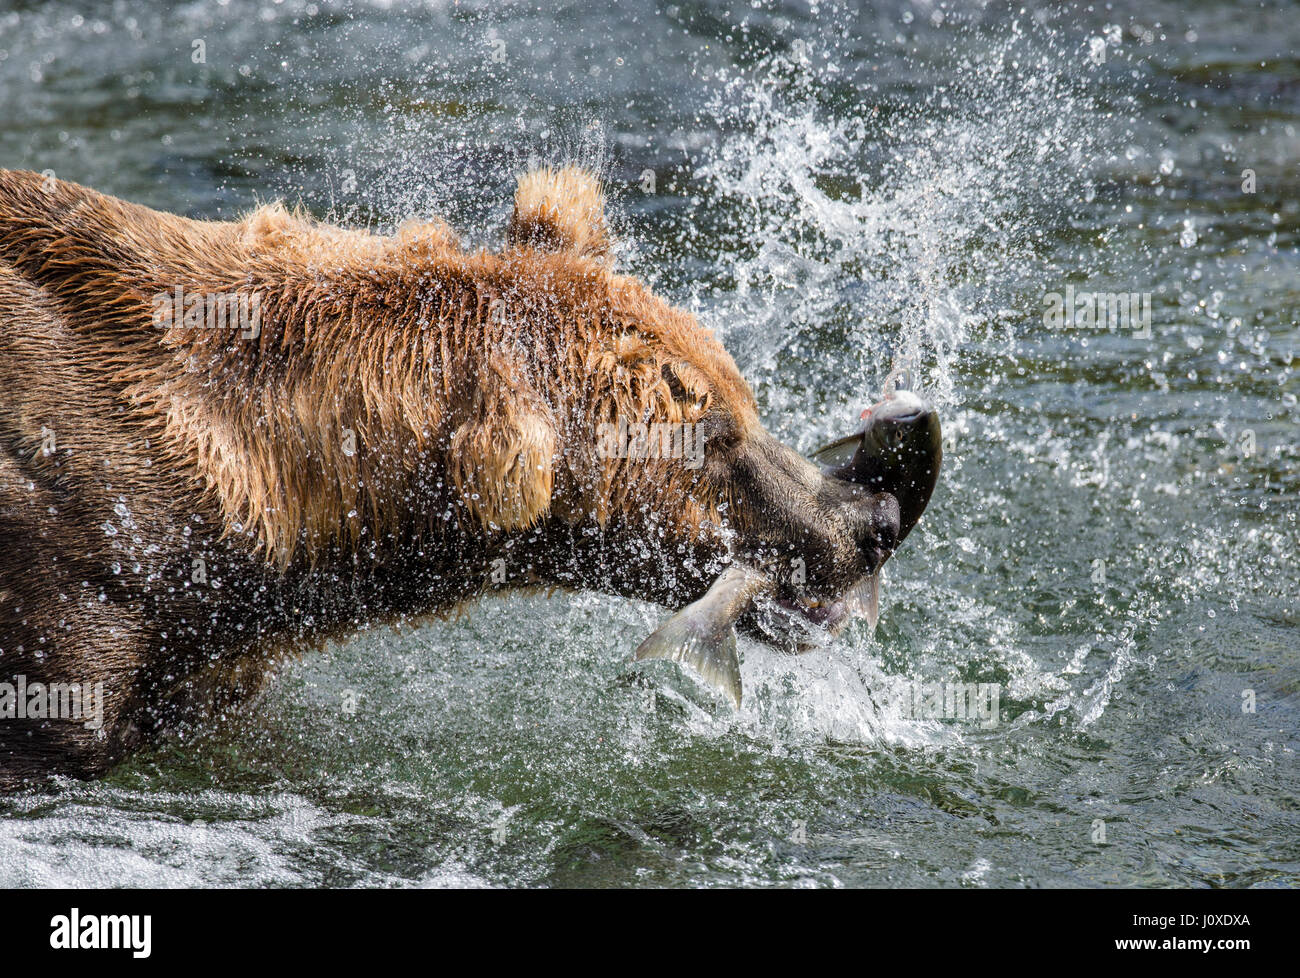 A brown bear catches salmon in the river. USA. Alaska. Kathmai National Park. Great illustration. Stock Photo